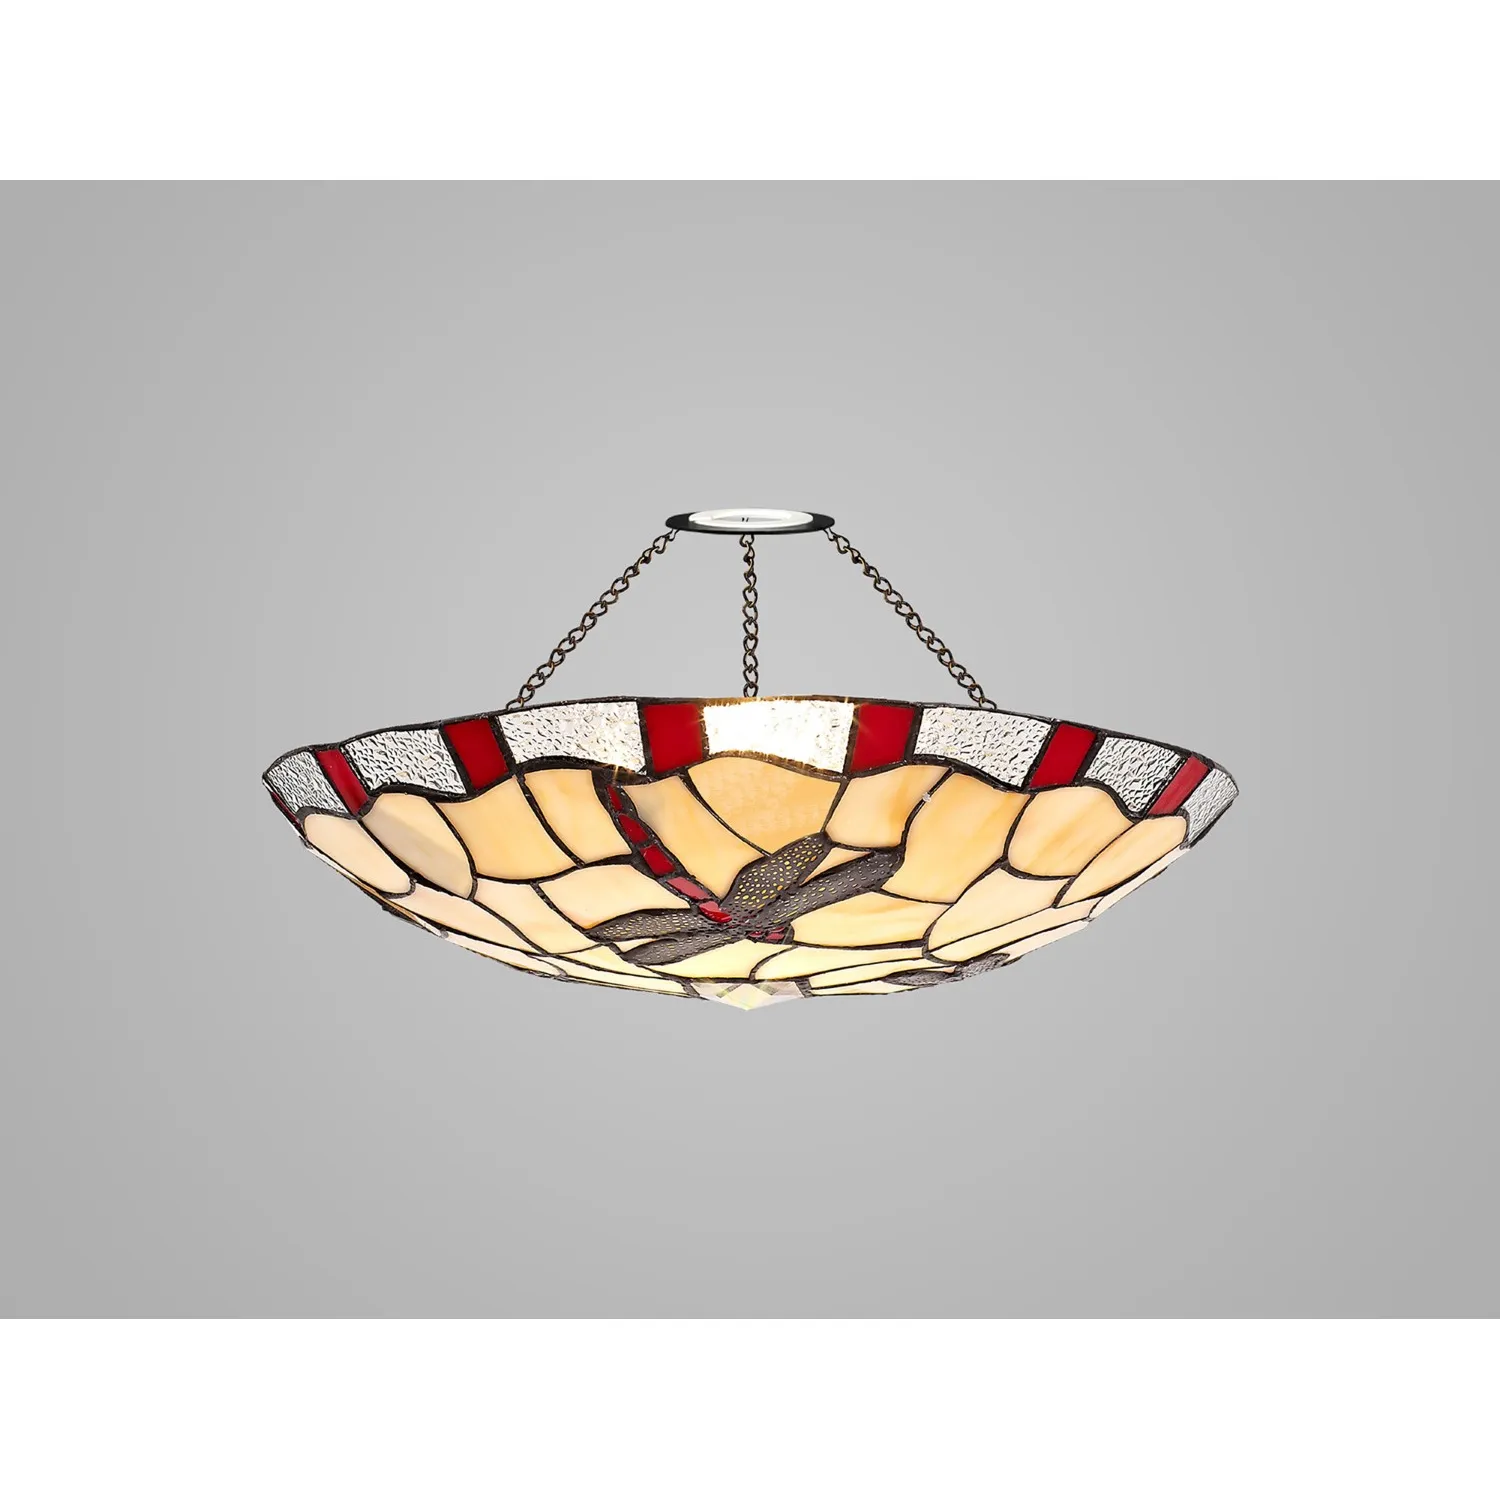 Cranleigh 35cm Tiffany Non electric Uplighter Shade, Red Cream Clear Crystal